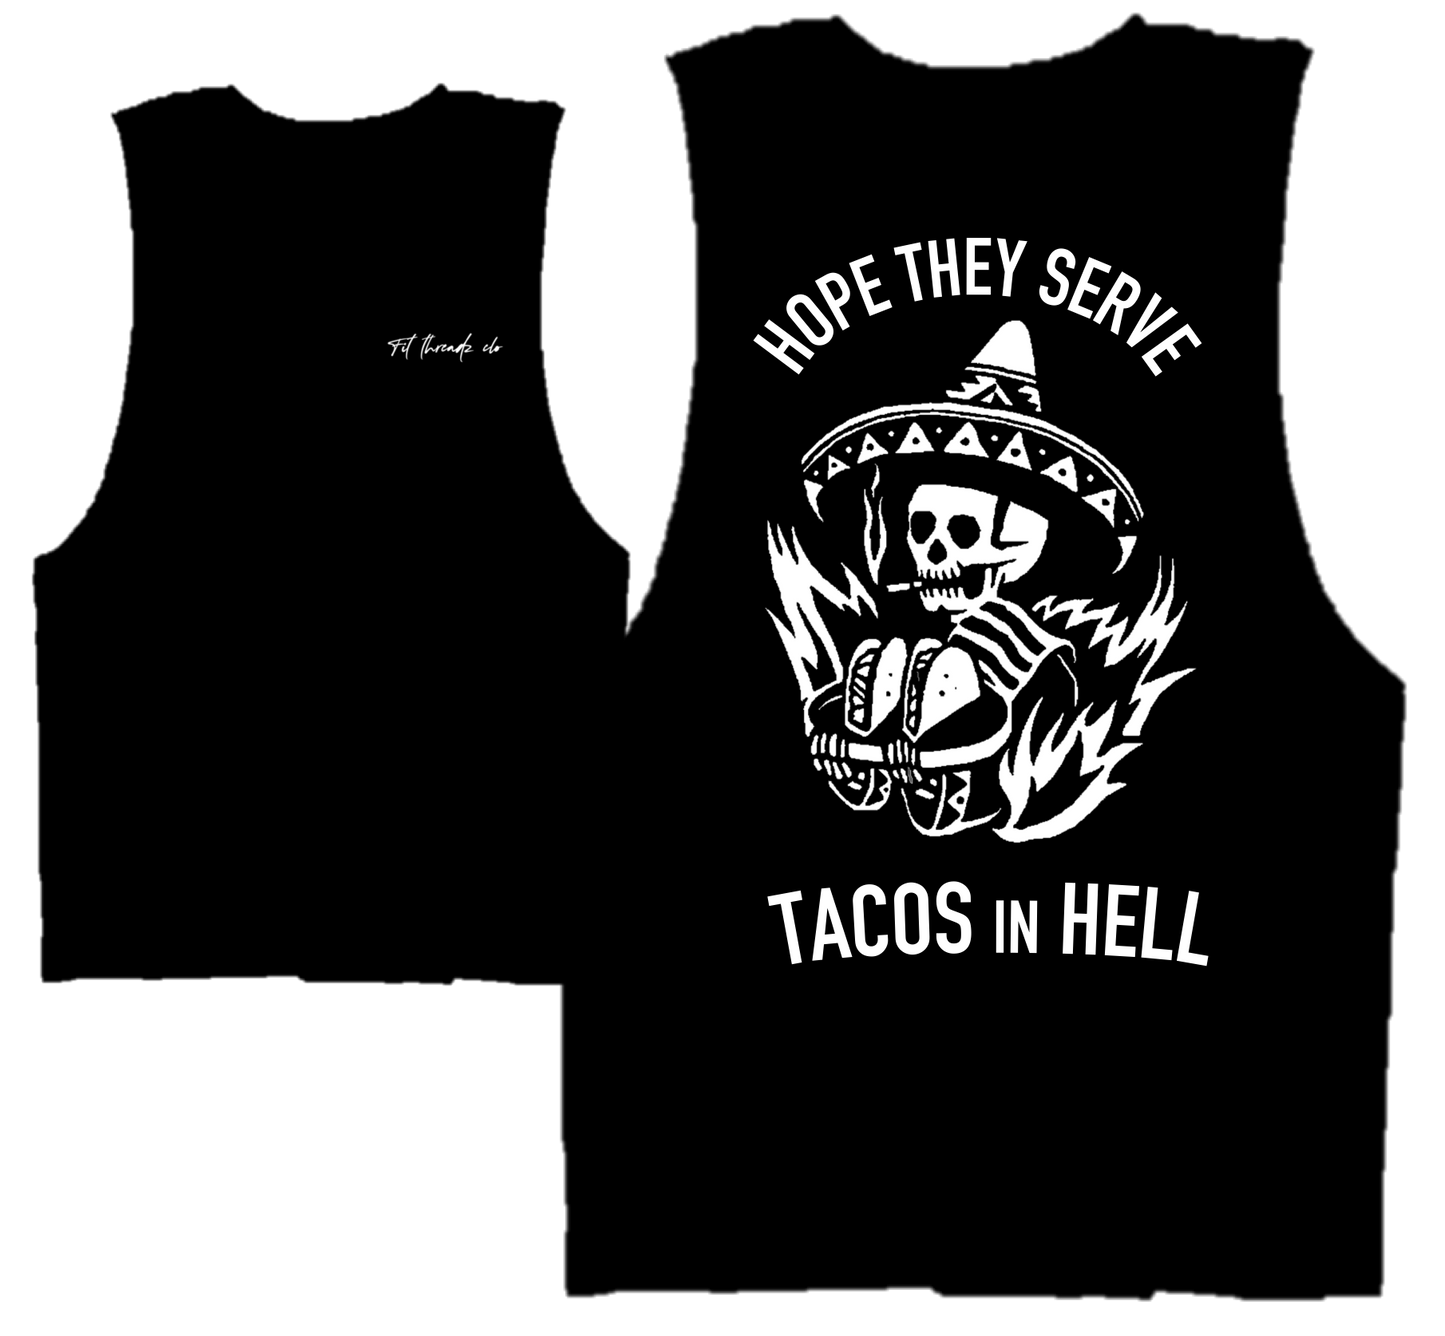 HOPE THEY SERVE TACOS IN HELL